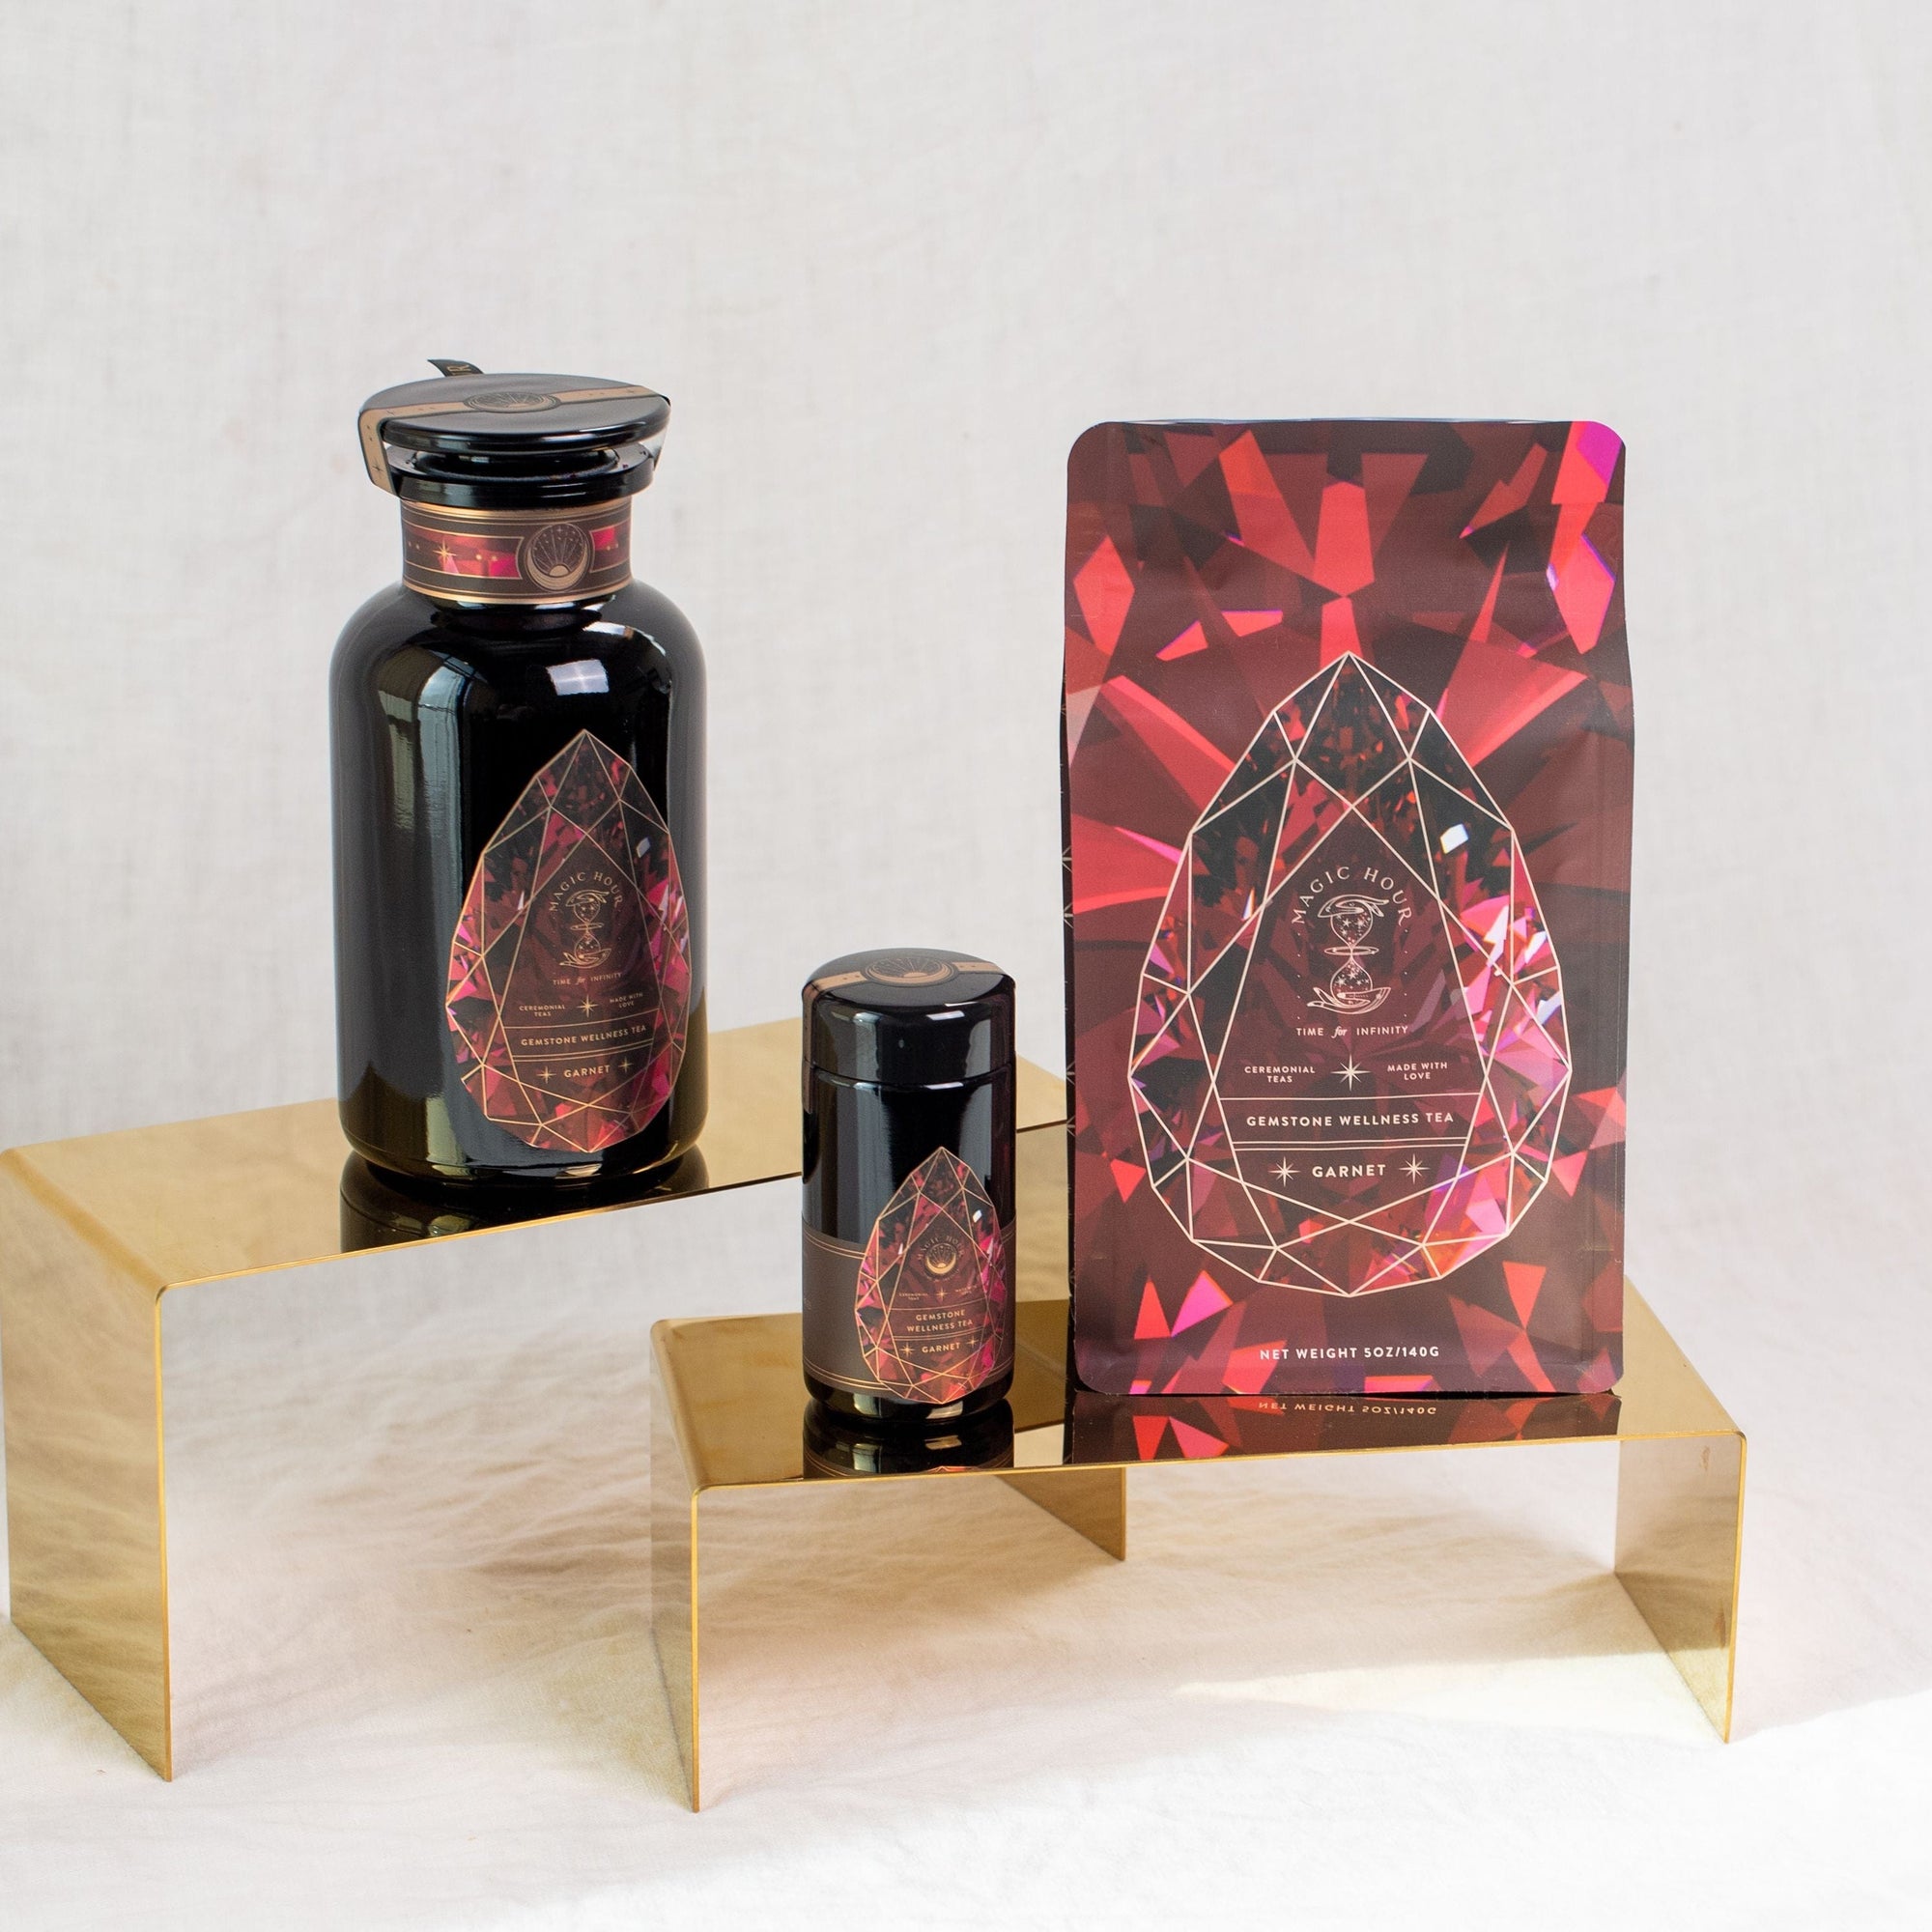 Three luxurious dark-hued containers with intricate red and gold geometric designs, labeled as Magic Hour's Gemstone Bundle: Garnet, Amethyst, Aquamarine, are elegantly displayed on golden stands against a light background. The products include a large bottle, a smaller jar, and a resealable bag.